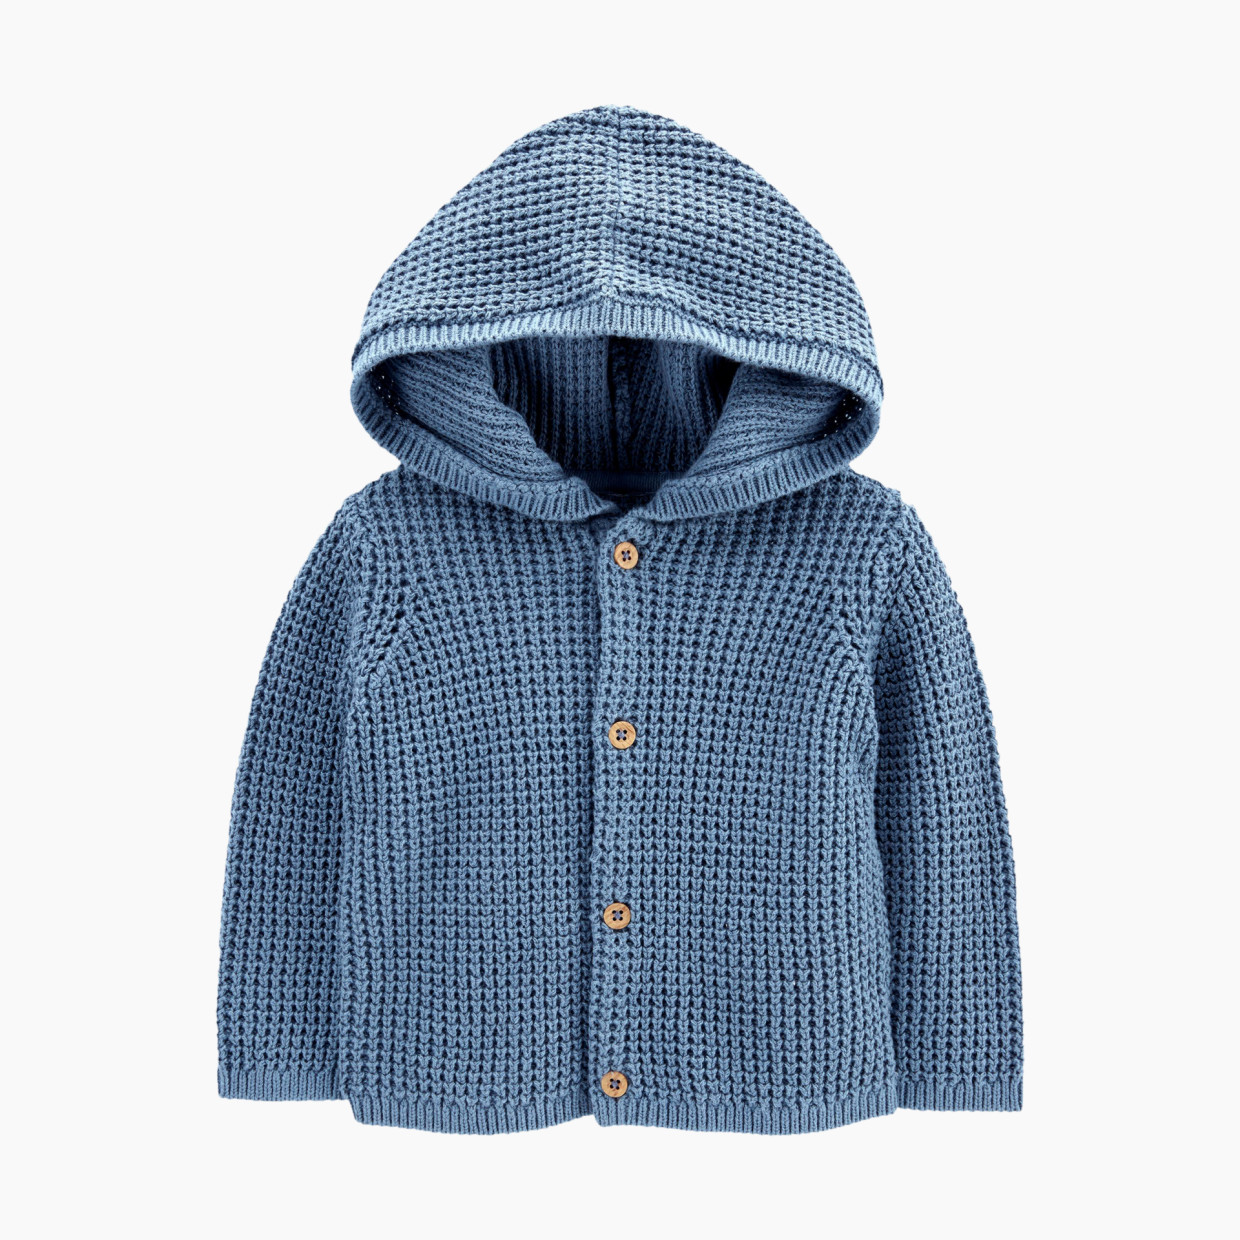 Carter's Hooded Cotton Cardigan - Blue, Nb.